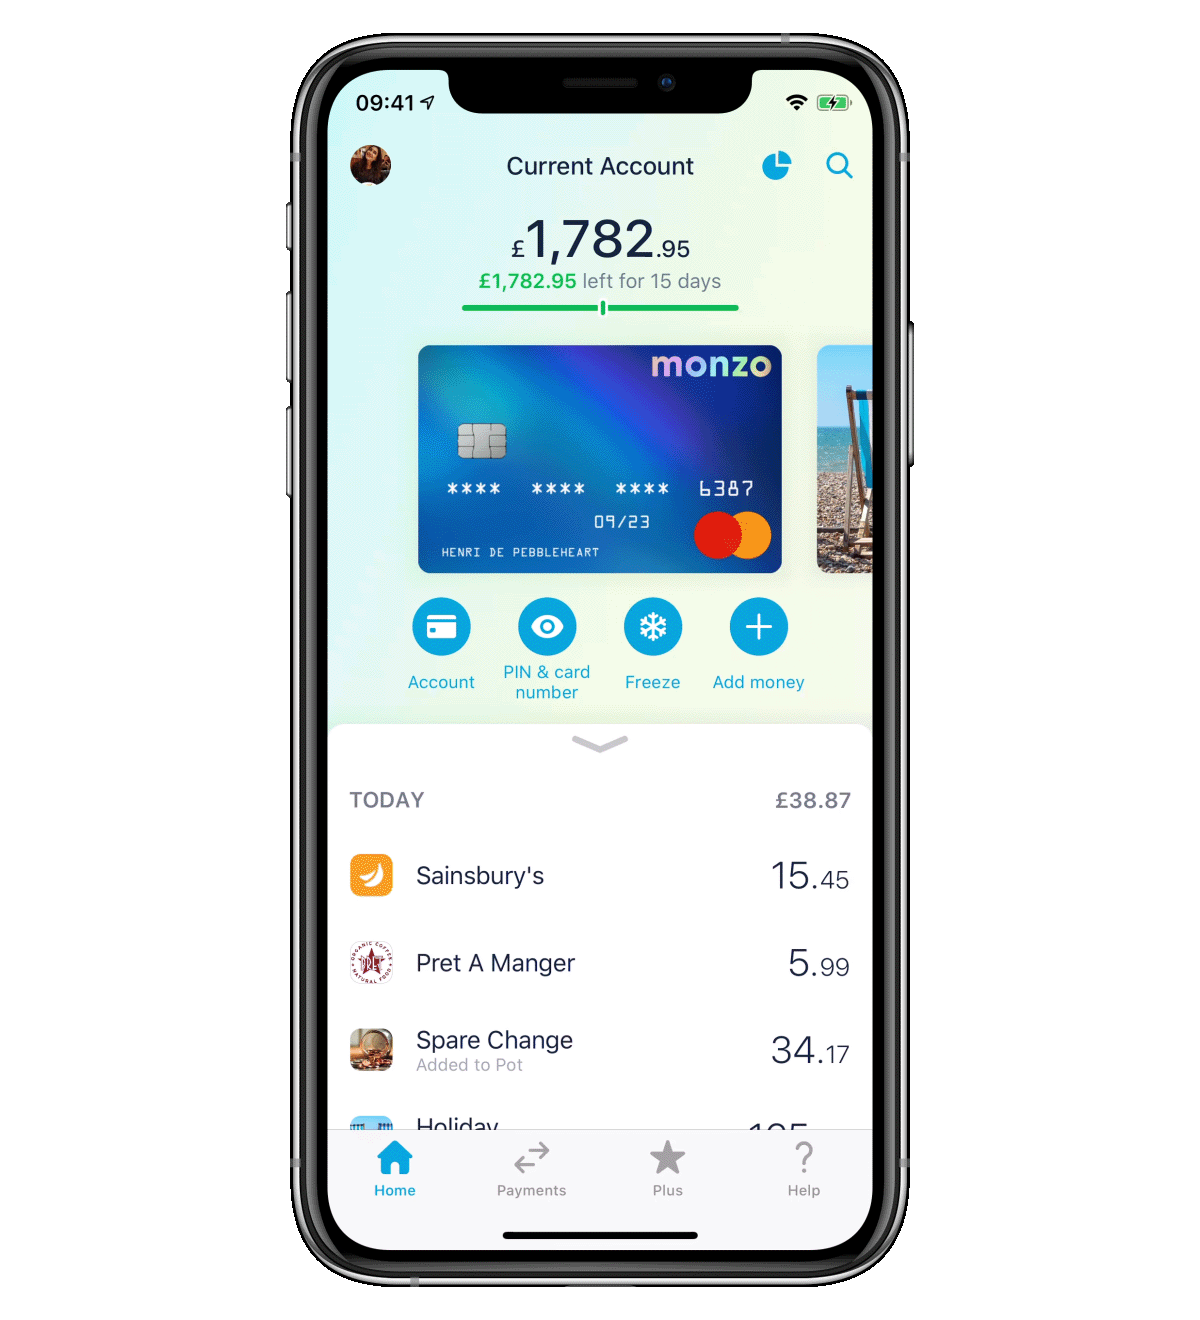 Video of Amex card in Monzo app.